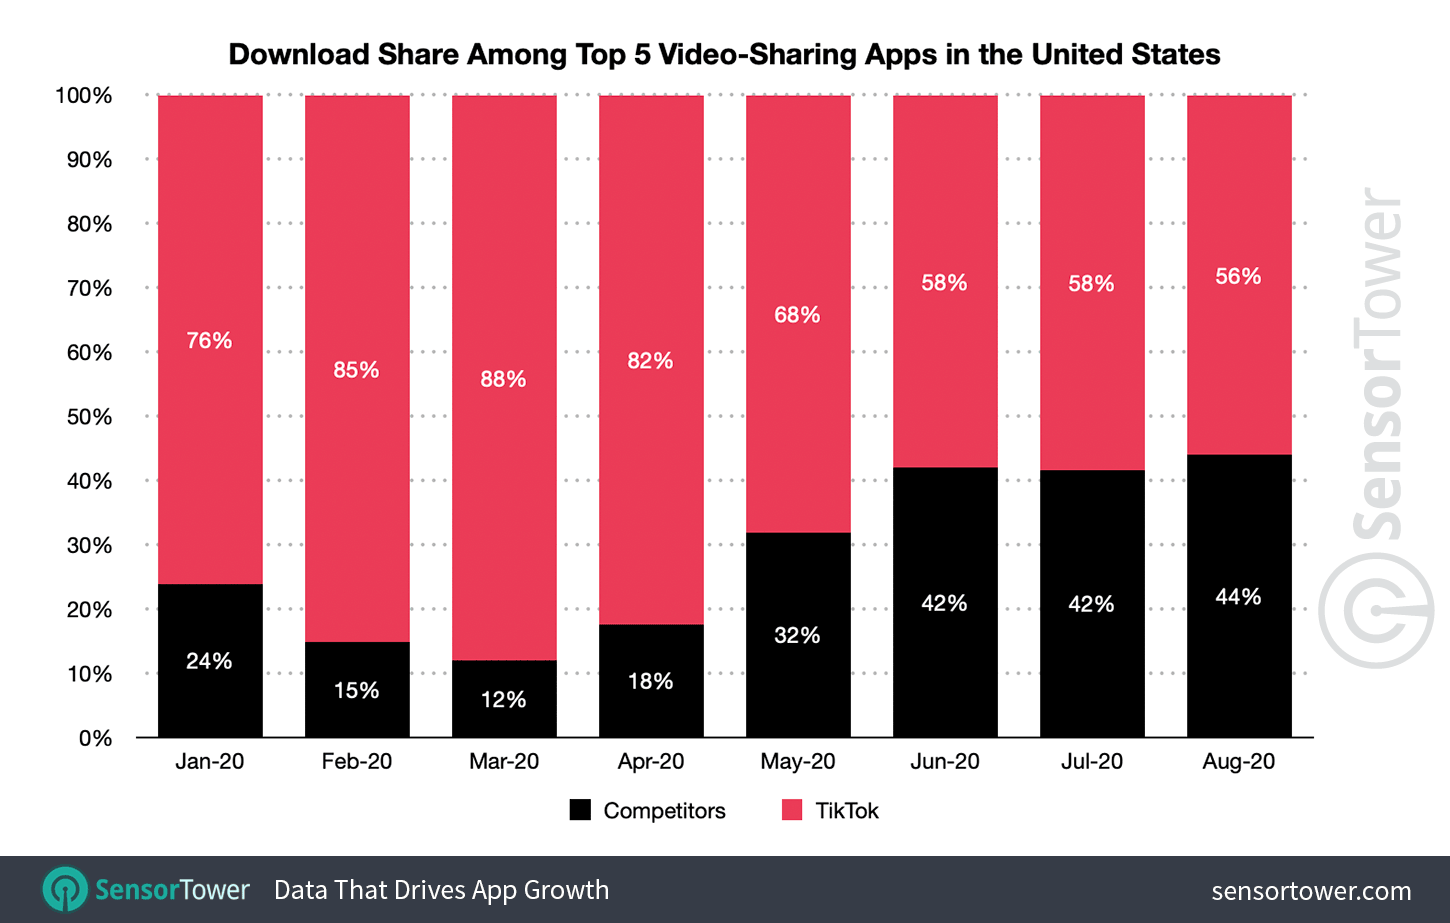 TikTok's competitors grew their market share to 44% in August 2020